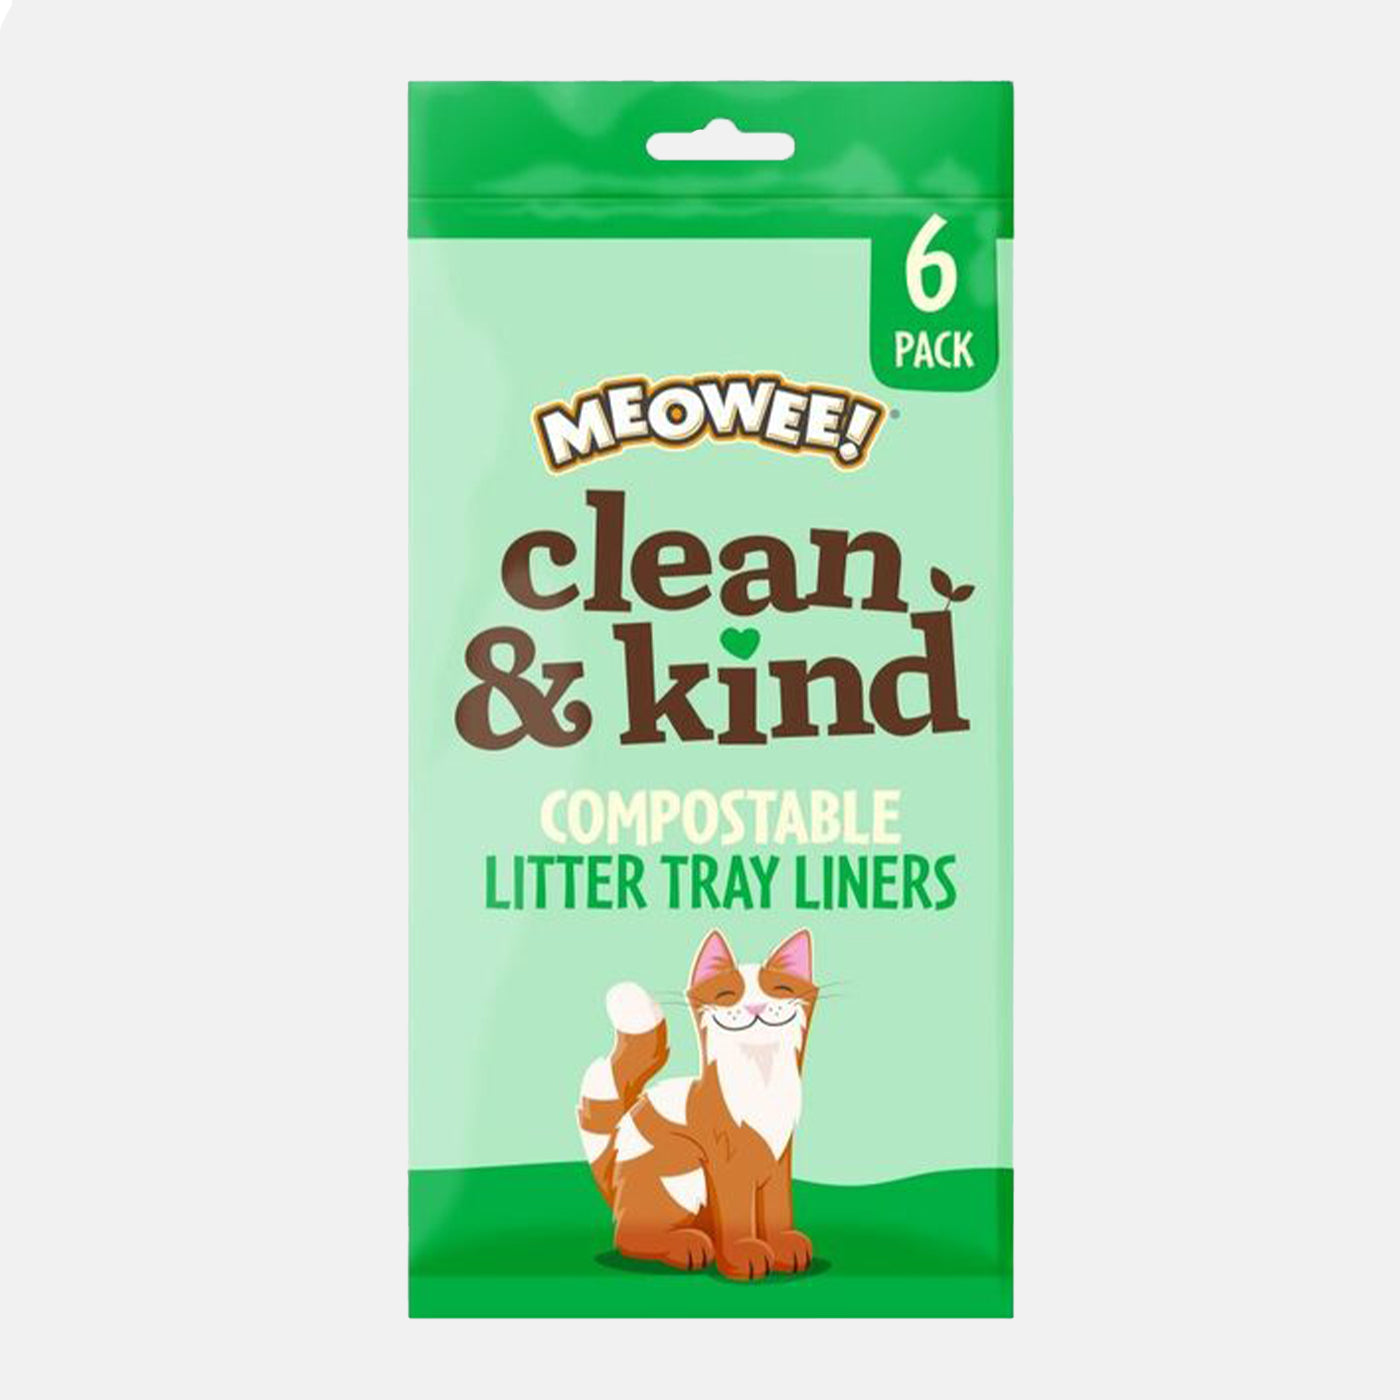 Meowee! Clean & Kind Compostable Litter Tray Liner